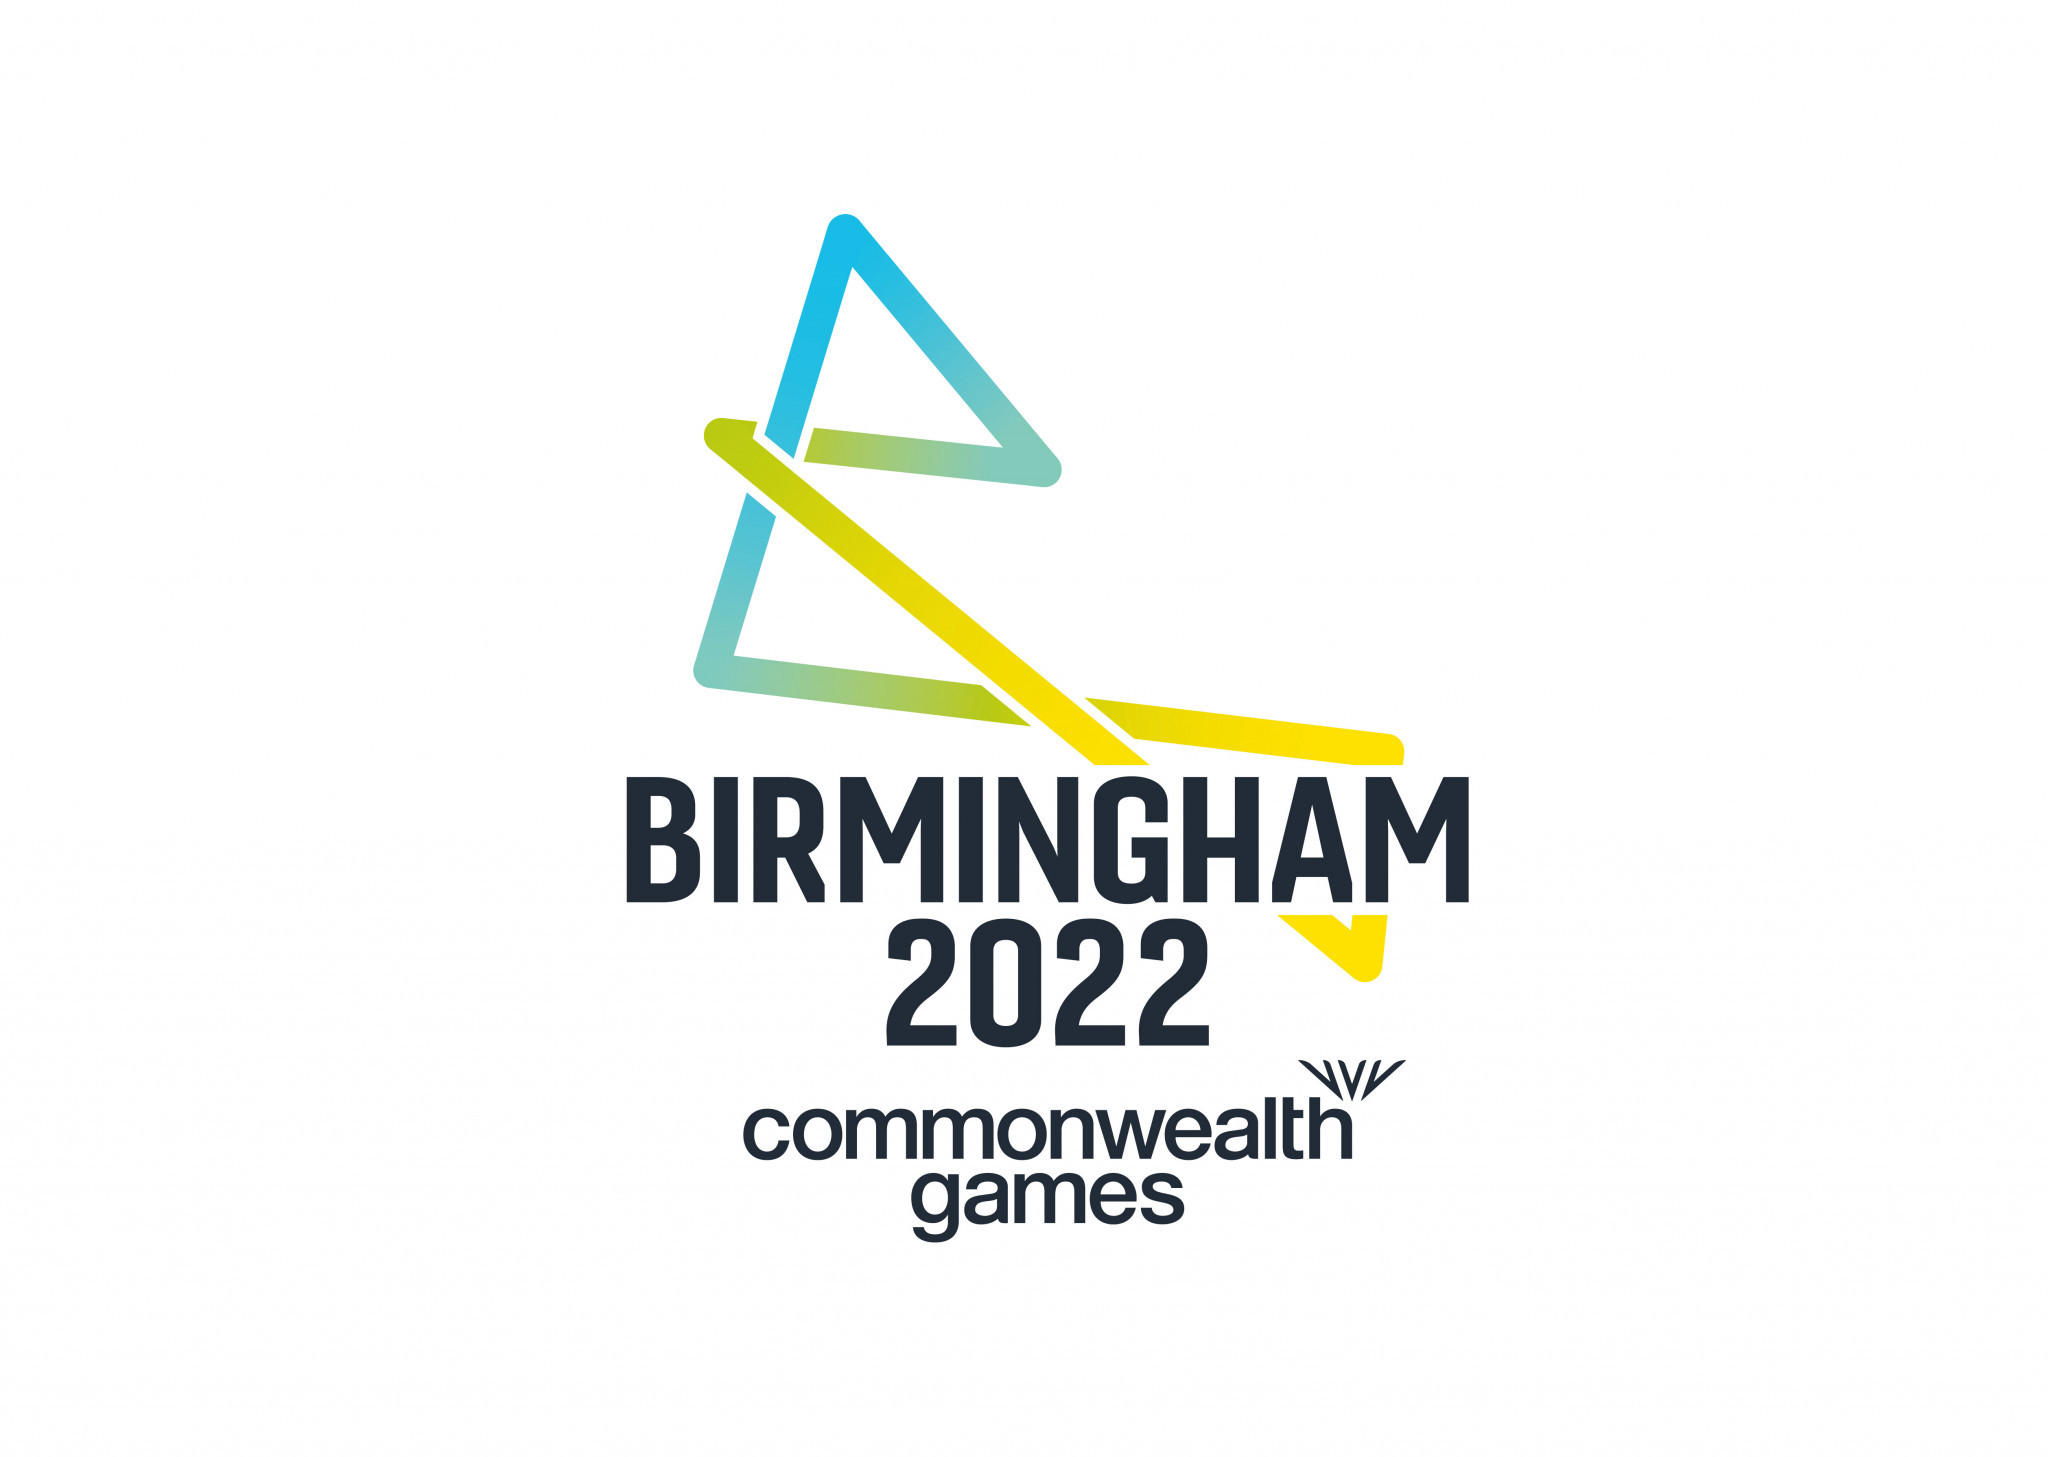 Birmingham 2022 launch logo with three years until start of Commonwealth Games 